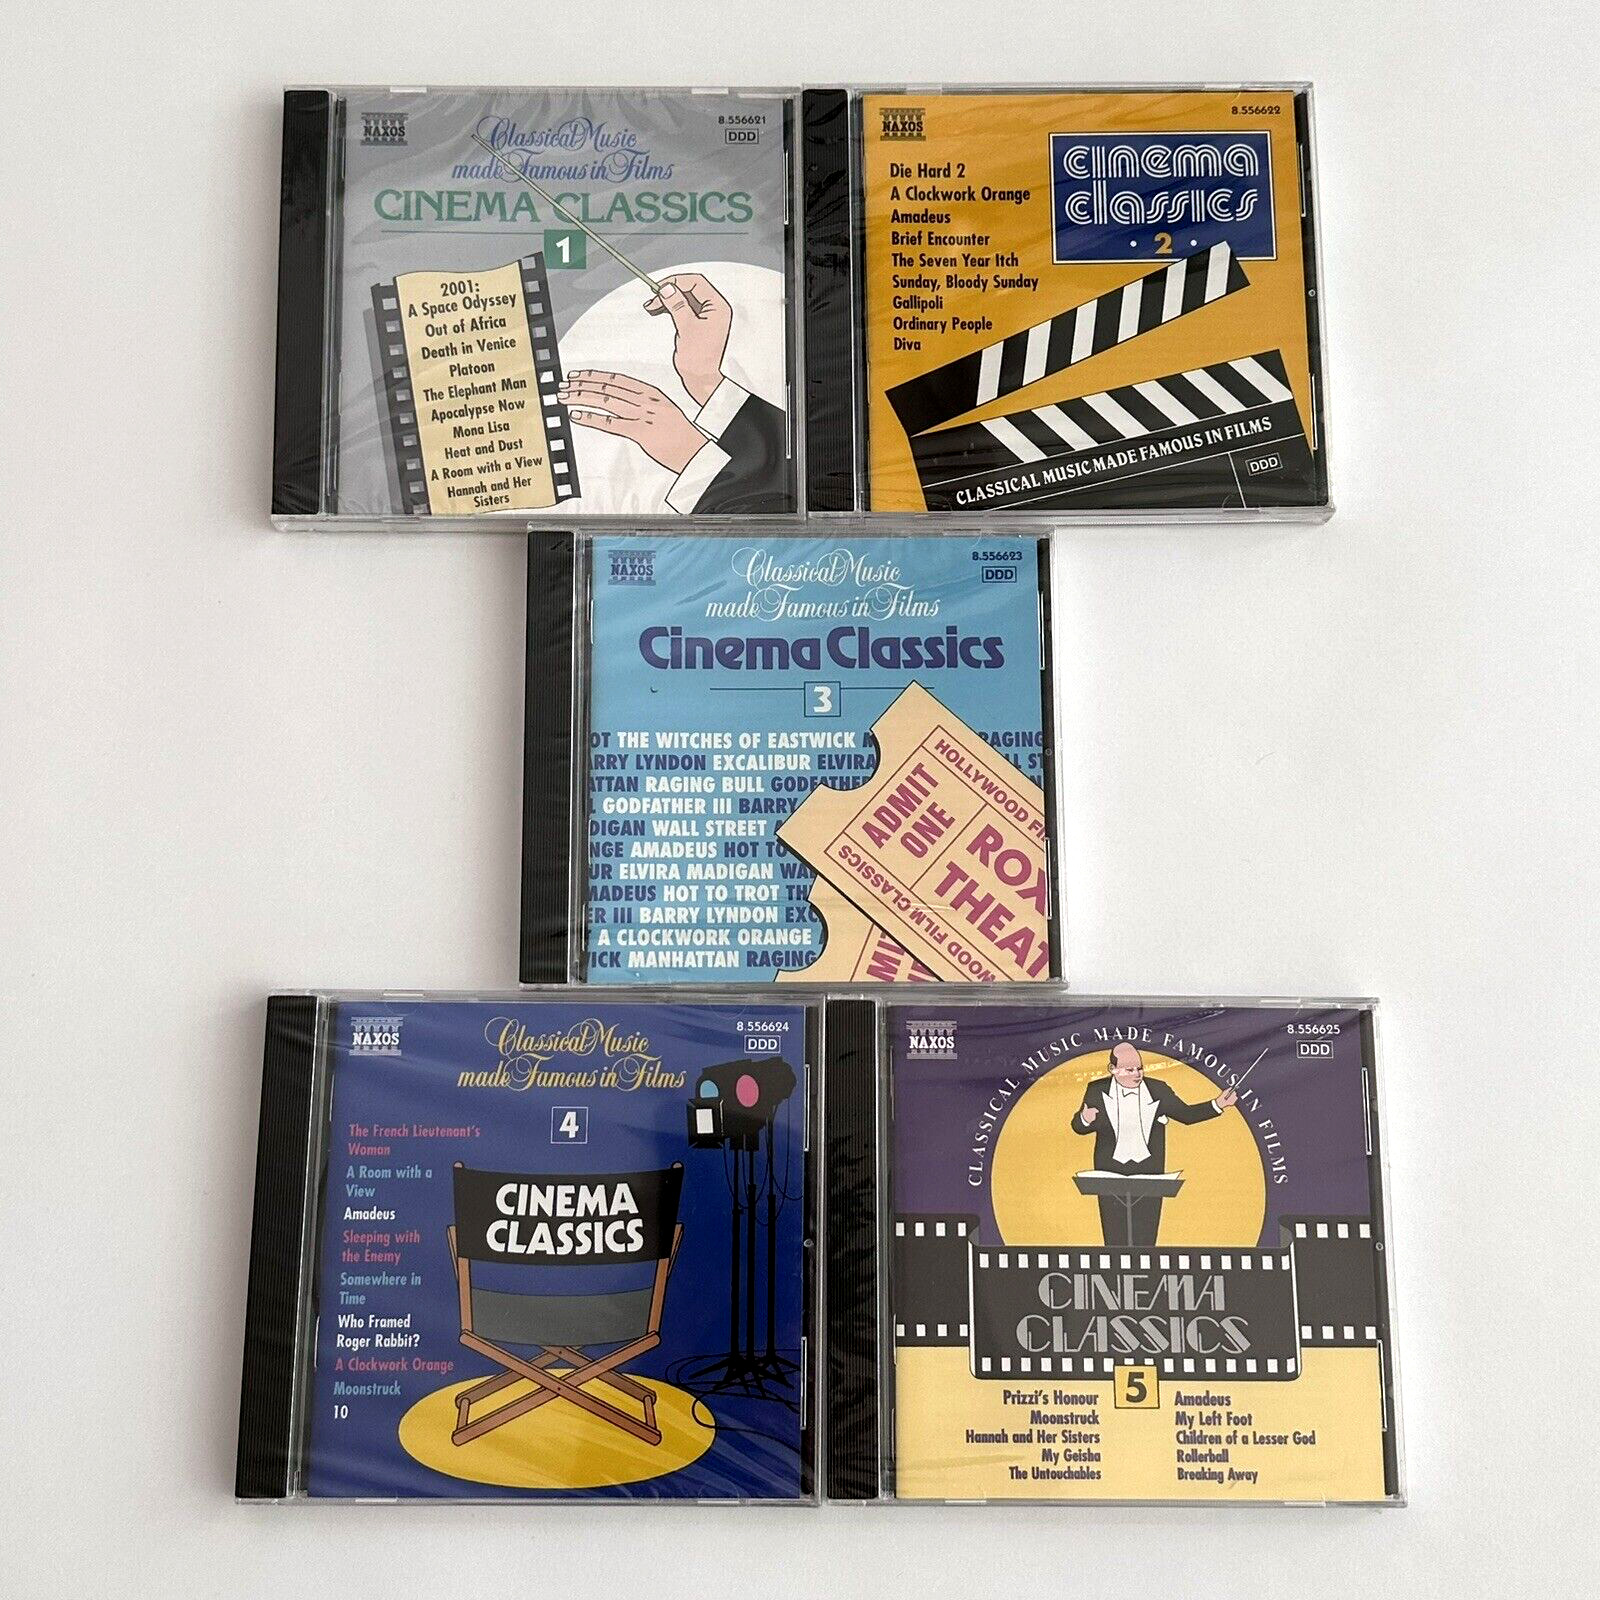 CINEMA CLASSICS Vol 1,2,3,4,5 Classical Music Made Famous in Films CD LOT SEALED